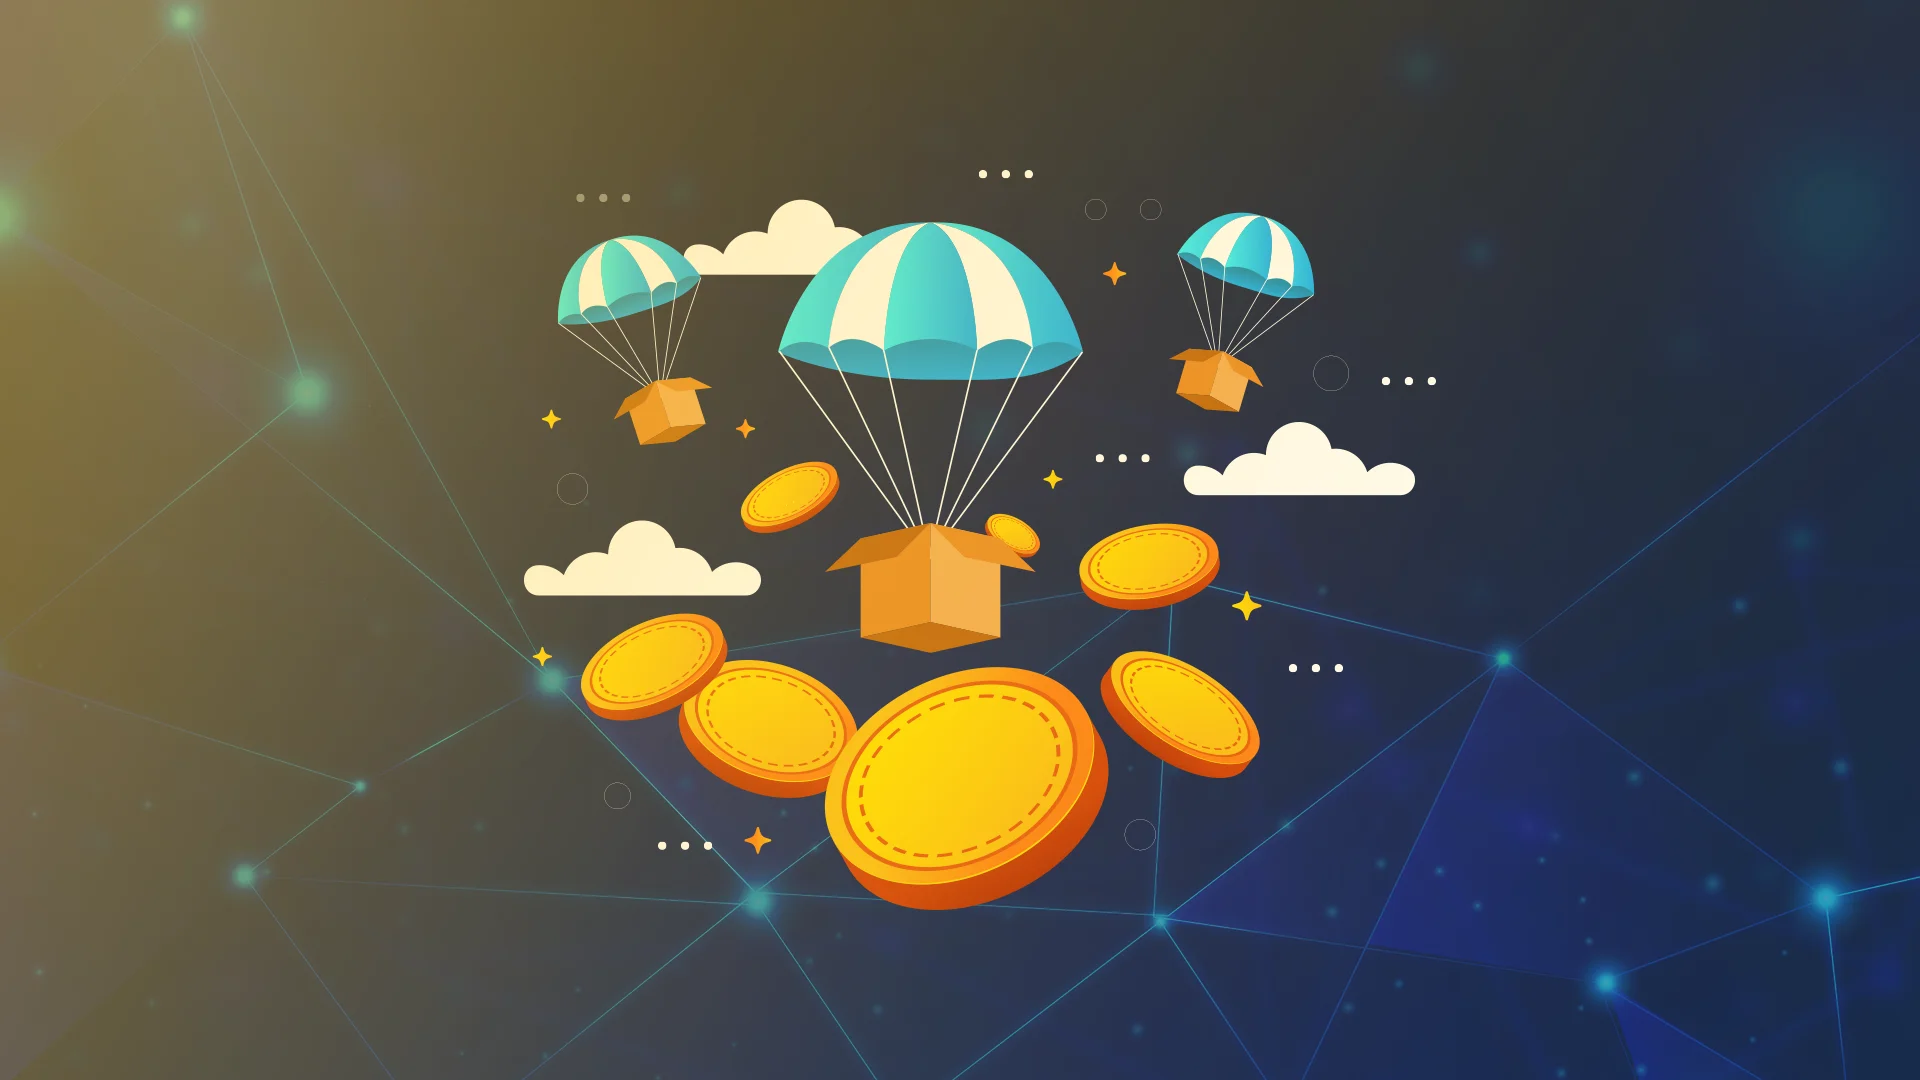 Airdrop King – Free Crypto Airdrops up to $ | March 